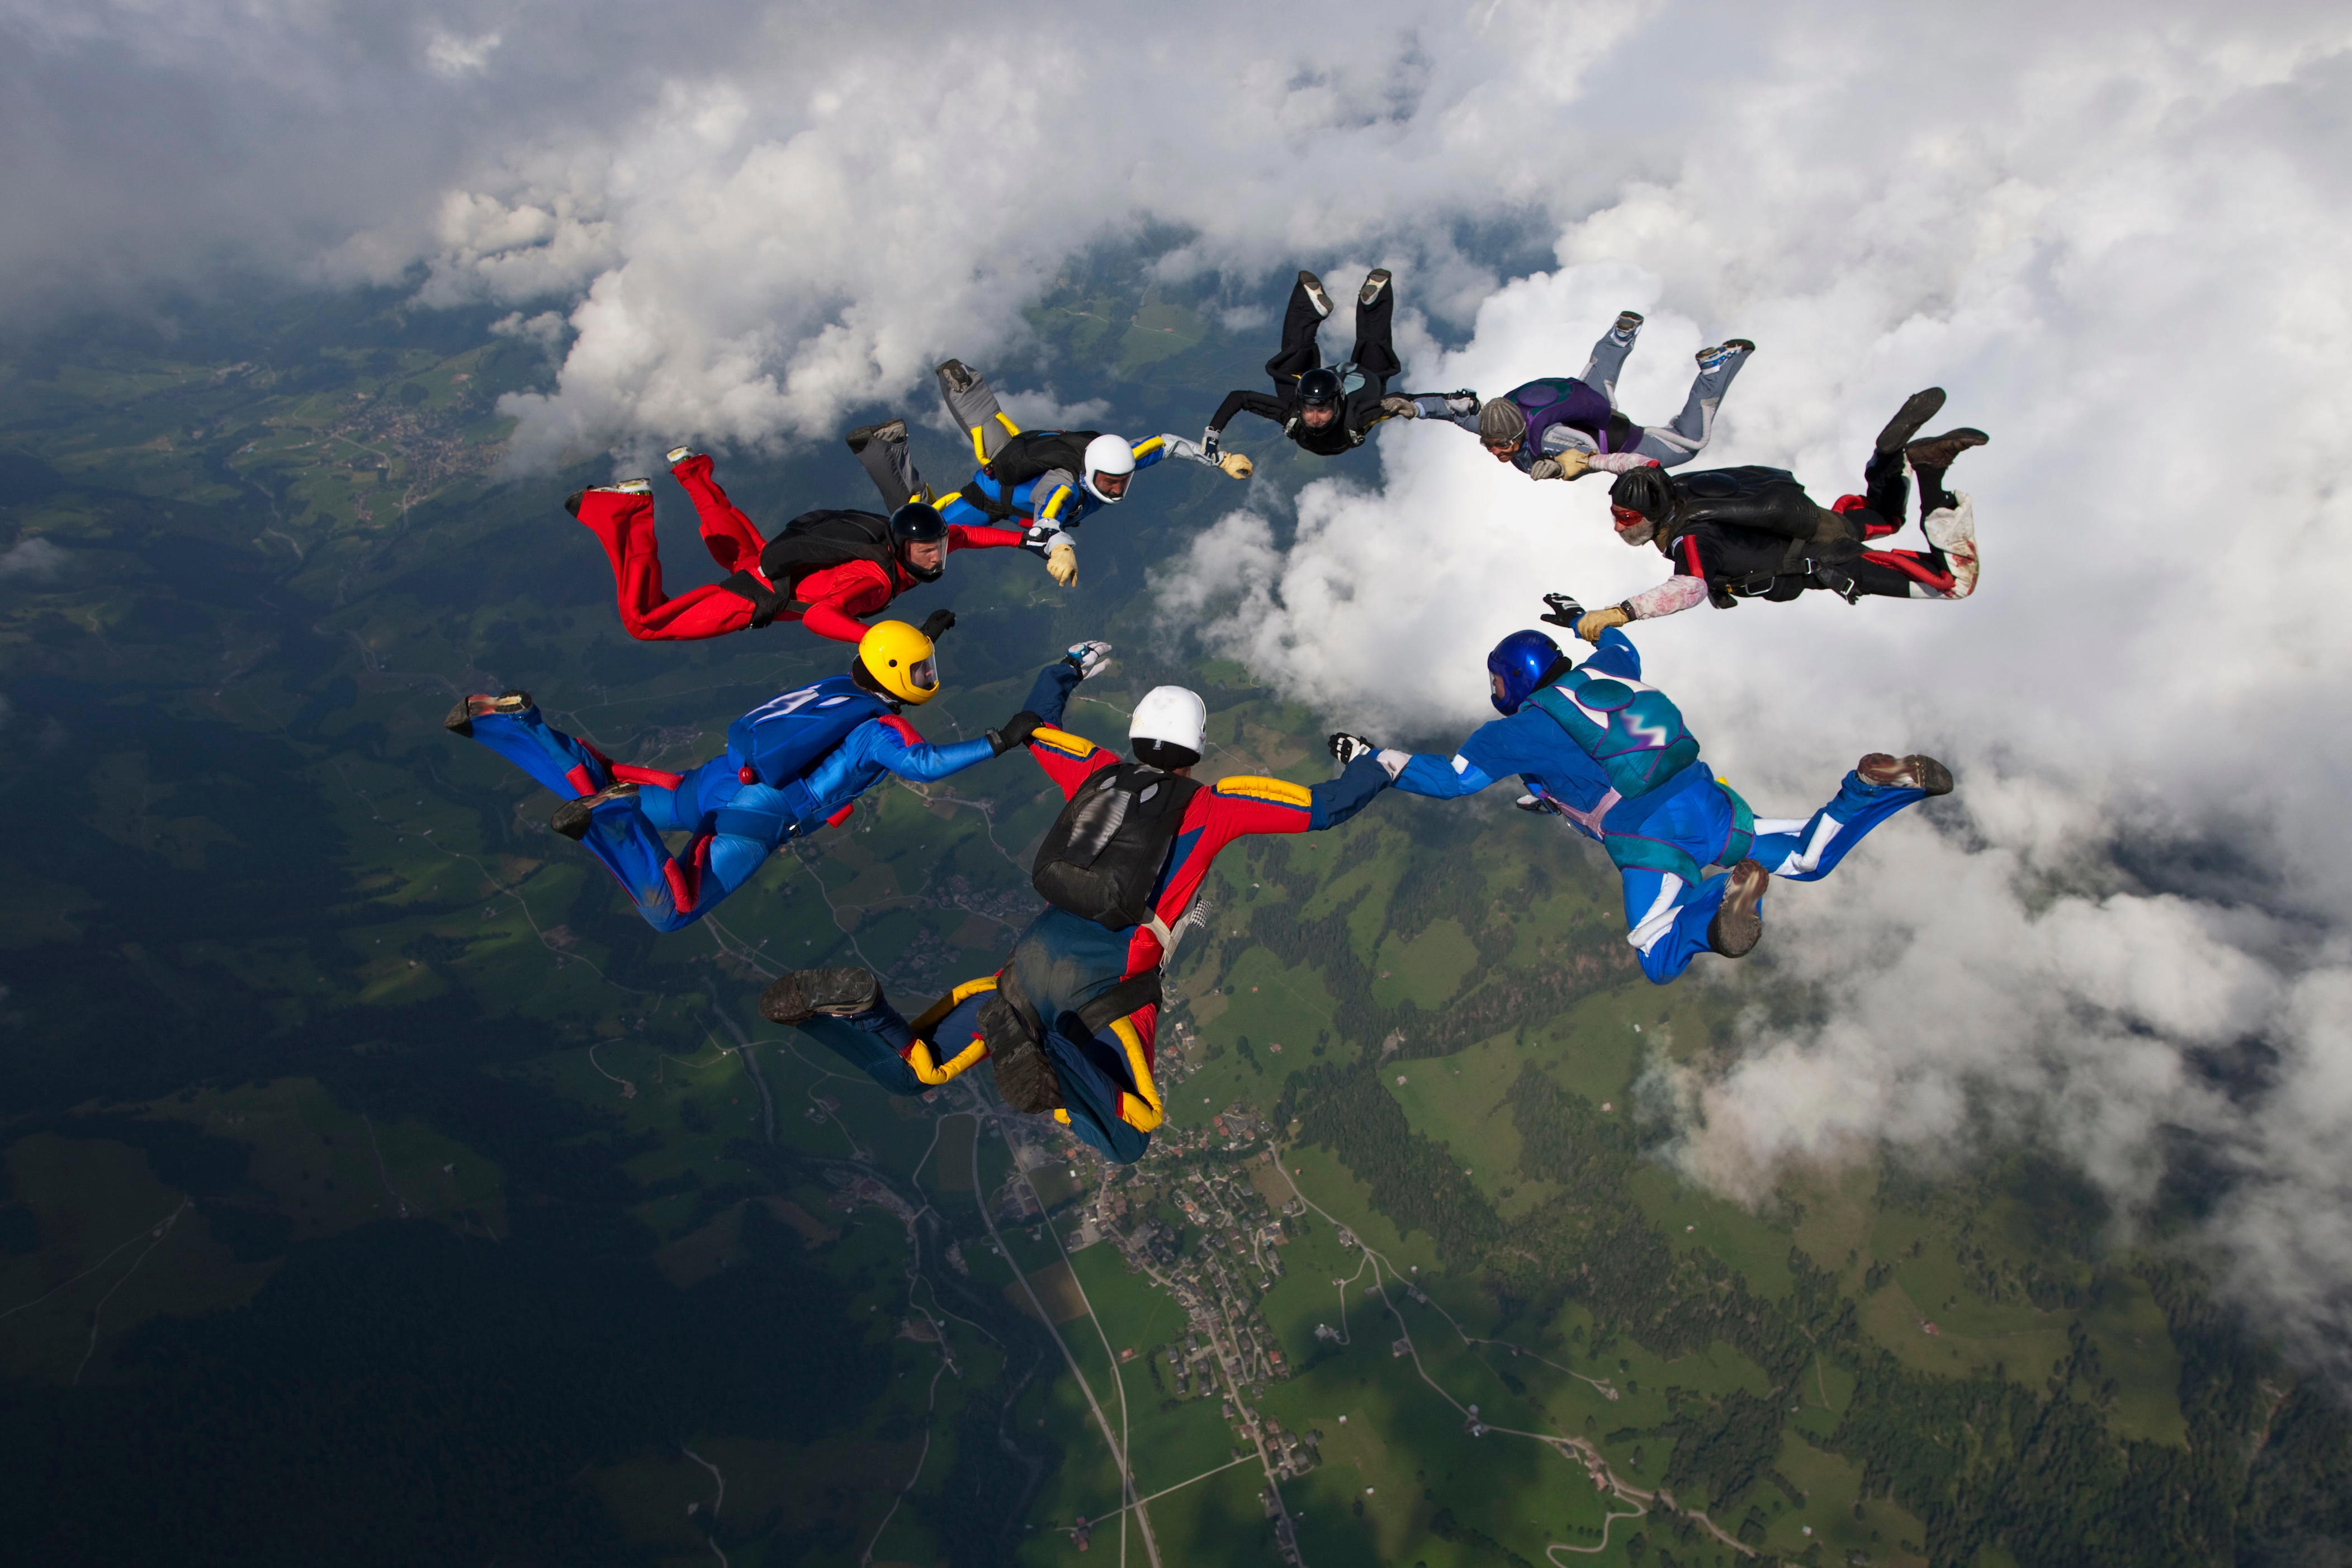 <p>Connor and four other men hold the <a href="https://www.guinnessworldrecords.com/world-records/744472-highest-halo-formation-skydive">Guinness World Record</a> for the highest HALO — high altitude, low opening — formation skydive at 38,139 feet. The crew set the record in September 2023.</p><p>"Larry and the Alpha-5 Team prepared for over one year to make the HALO formation skydive. They jumped from a hot air balloon and made the jump to support the Special Operations Warfare Foundation (SOWF) charity," the Guinness World Record website says.</p>